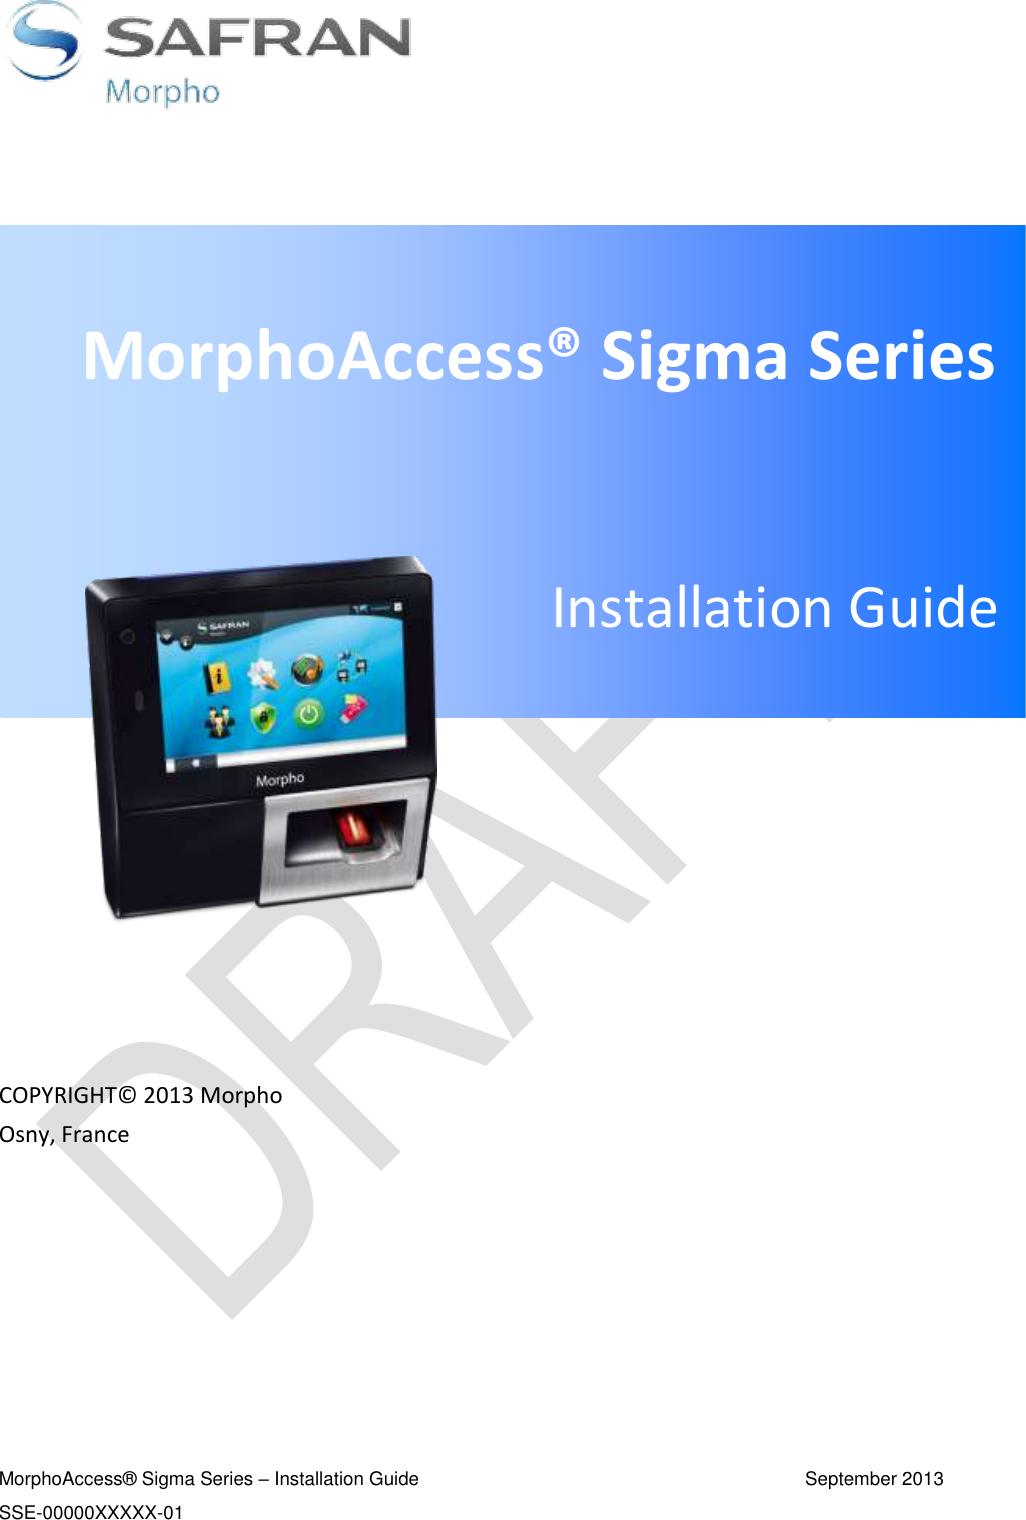      COPYRIGHT© 2013 Morpho Osny, France          MorphoAccess® Sigma Series – Installation Guide  September 2013 SSE-00000XXXXX-01  MorphoAccess® Sigma Series  Installation Guide 